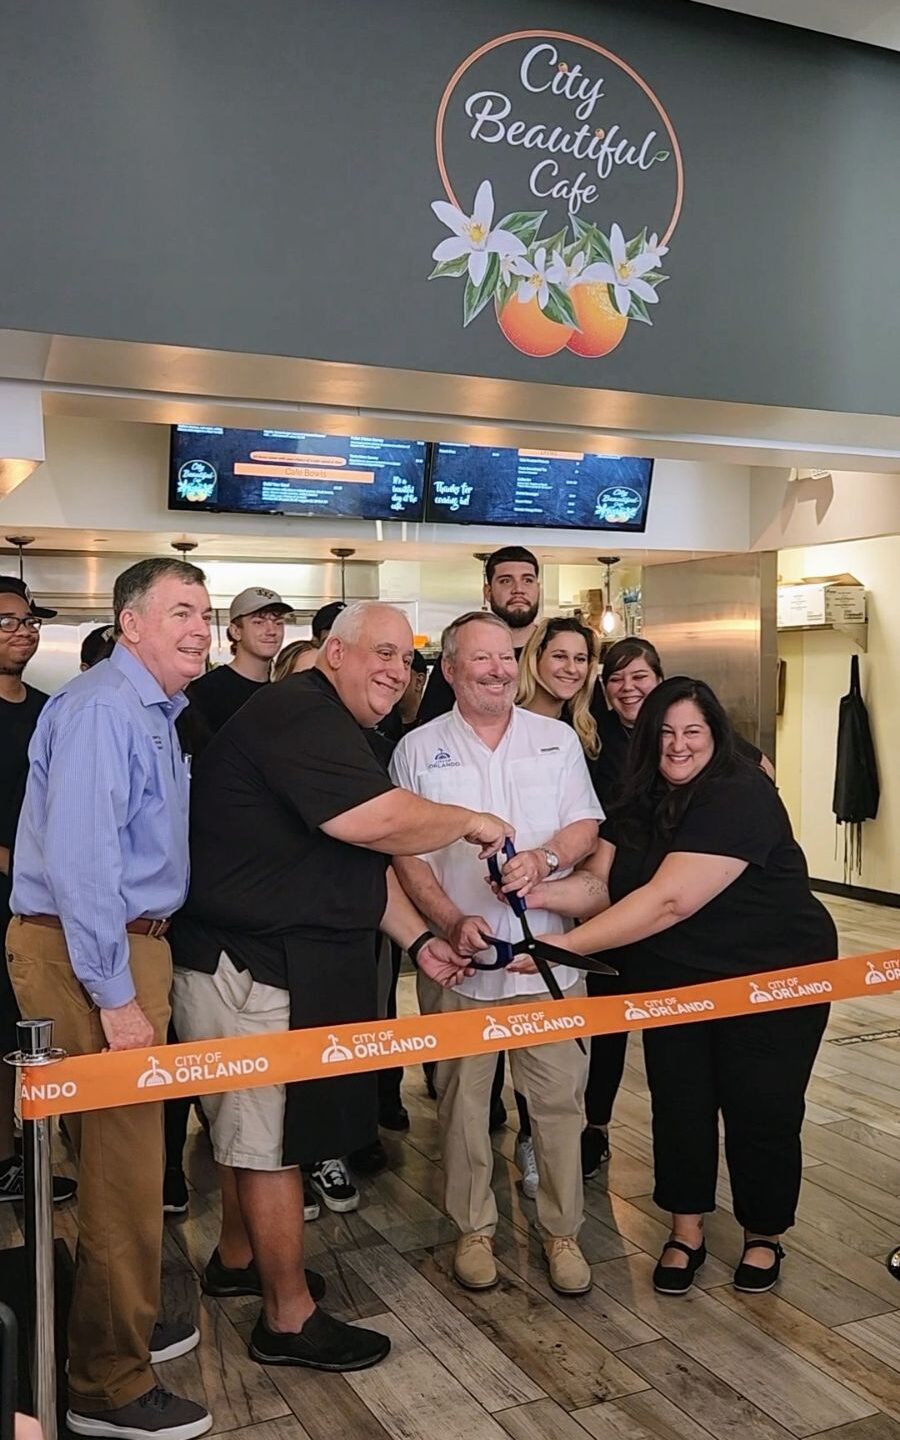 Owner of City Beautiful Cafe commemorates the grand opening with a ribbon cutting ceremony. He is joined by city officials and staff members.